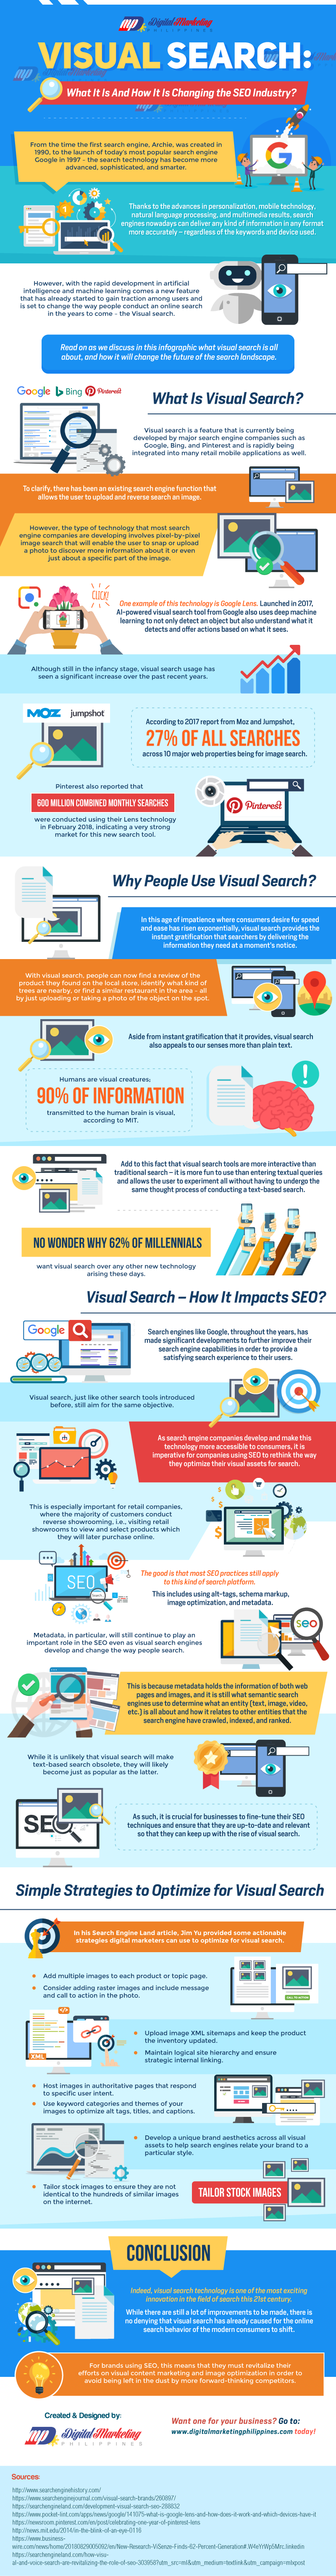 Visual Search: What It Is and How It Is Changing the SEO Industry? [Infographic]